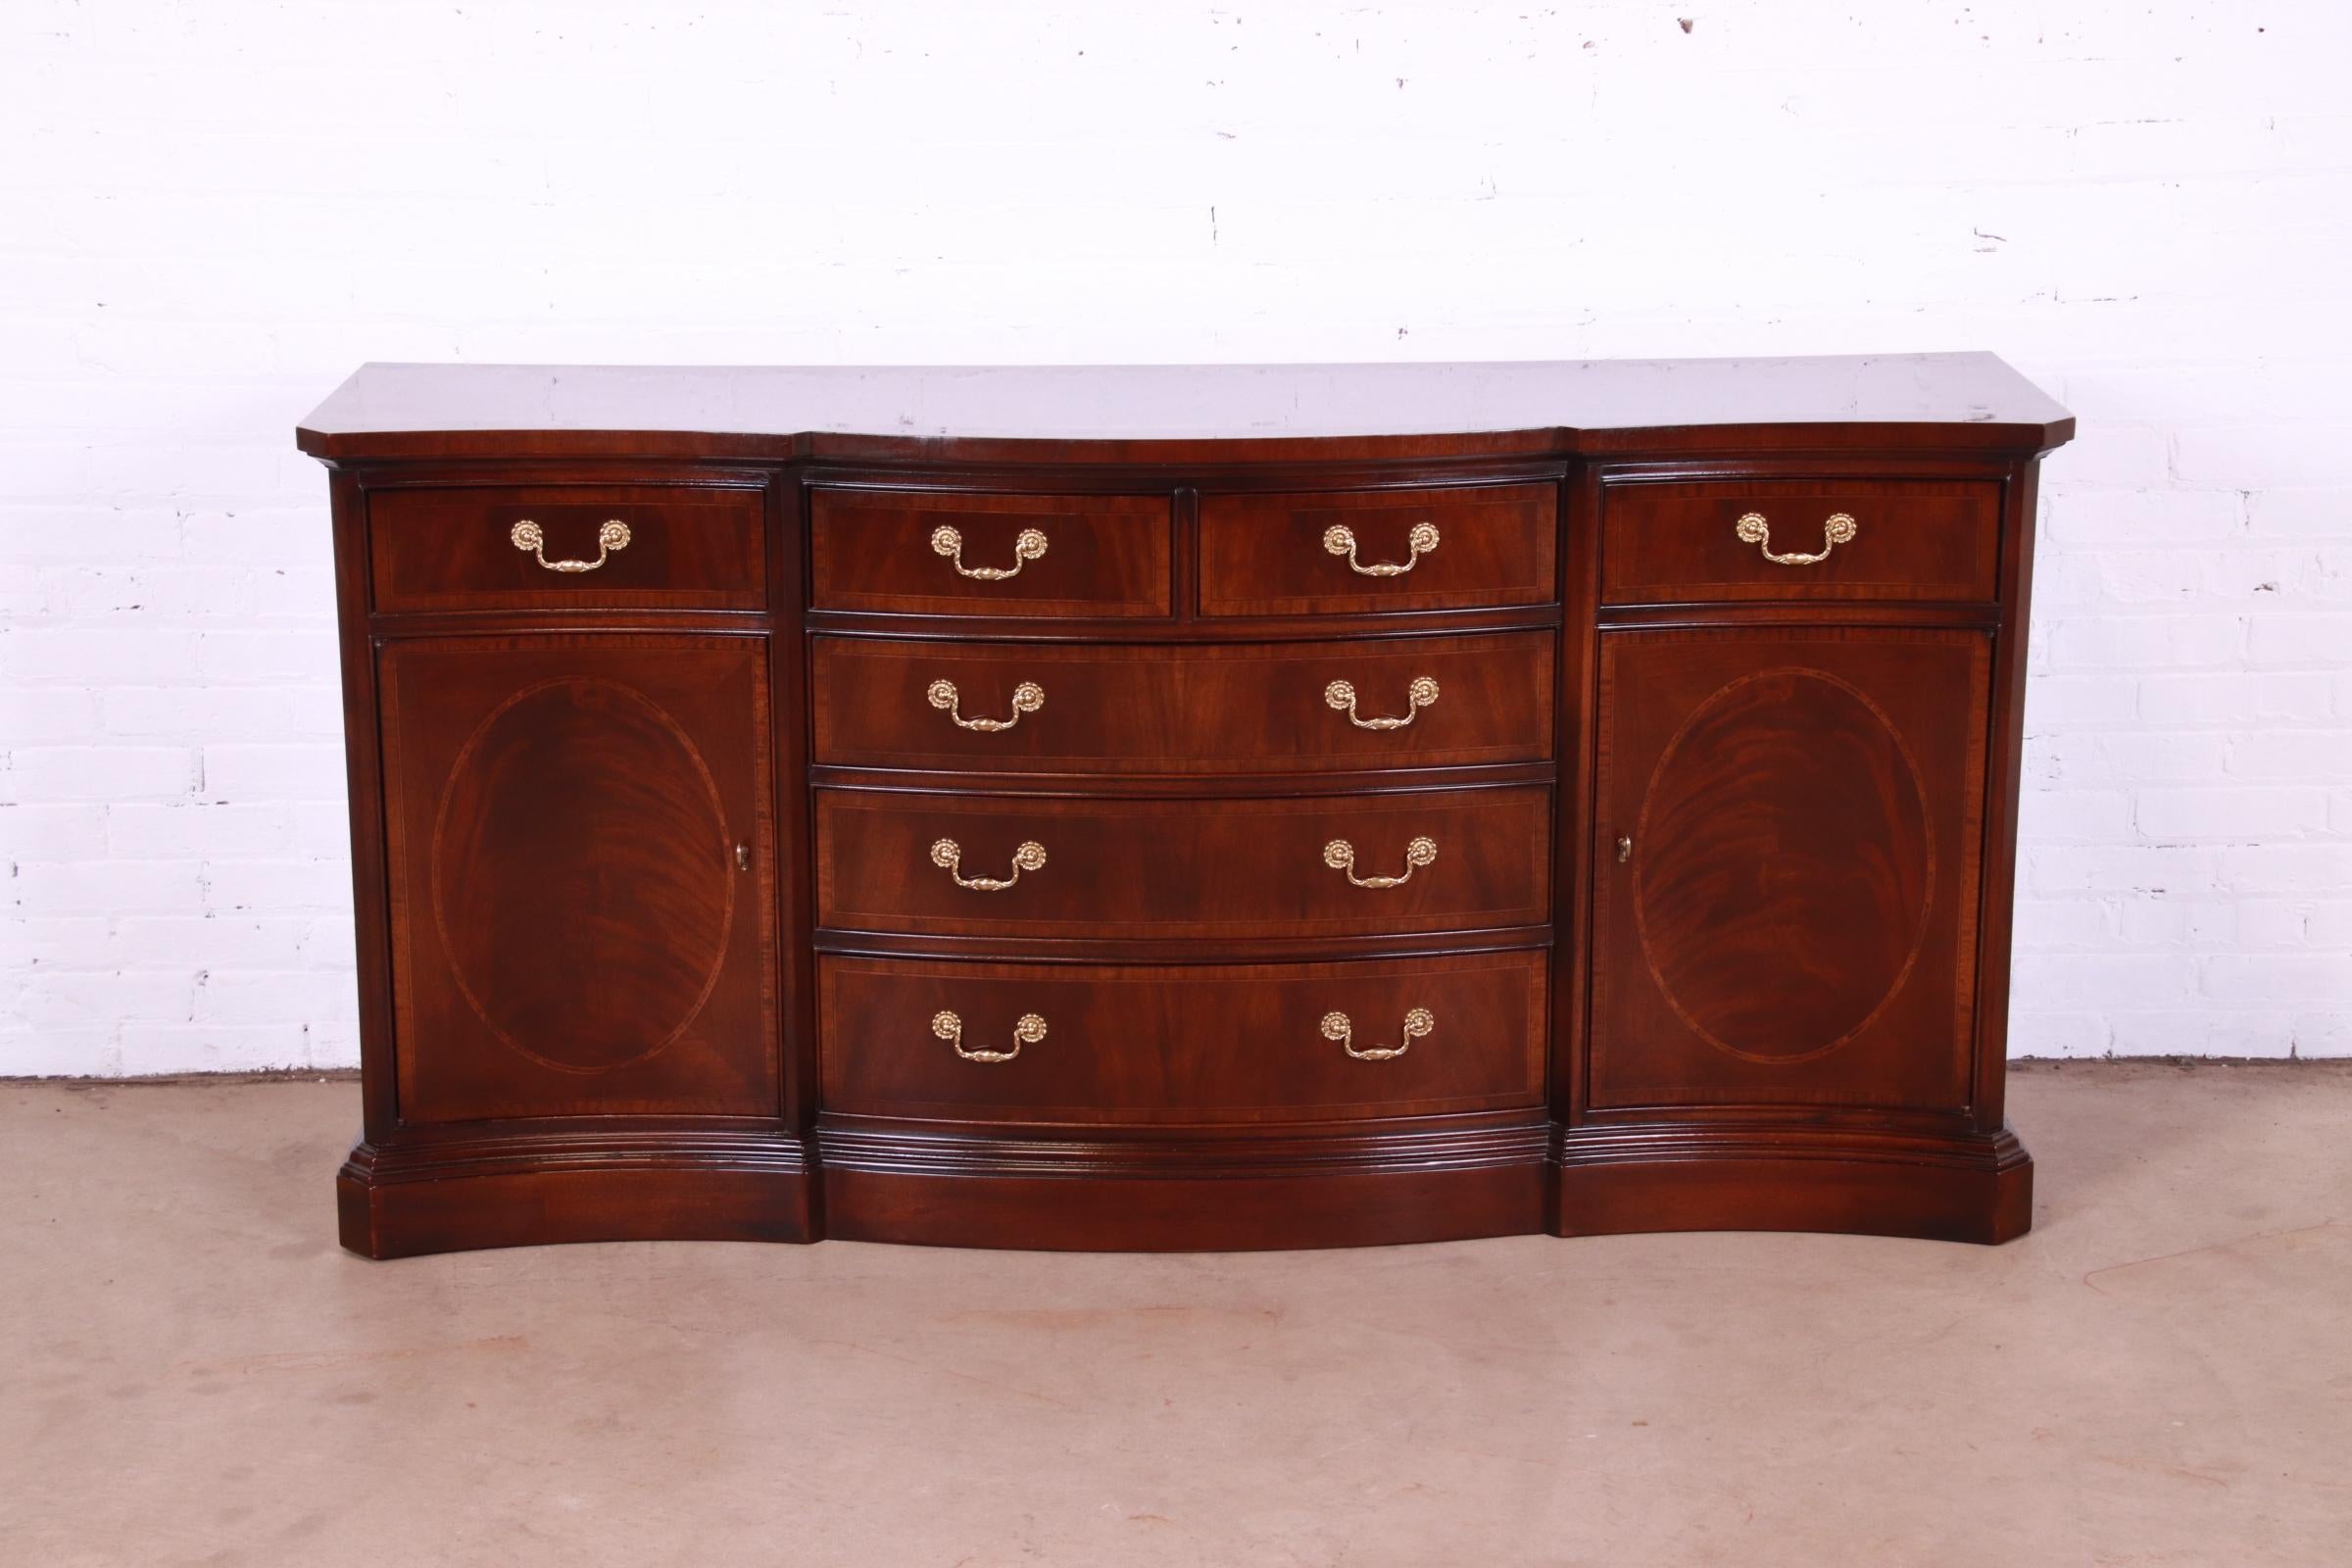 A gorgeous Georgian style sideboard, buffet, or bar cabinet

By Drexel Heritage, 